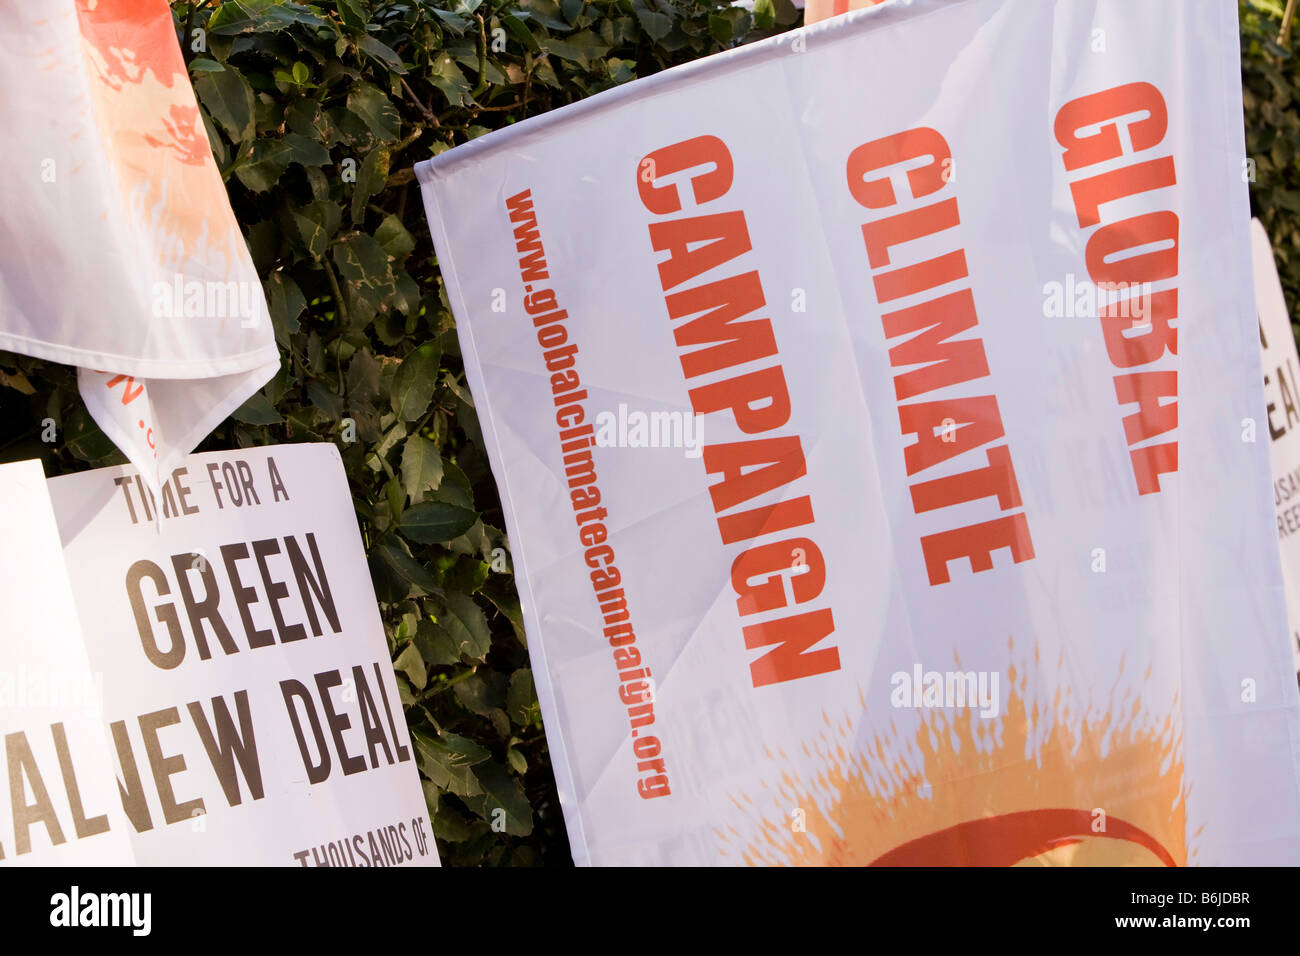 Protest banners at a climate change rally in London December 2008 Stock Photo